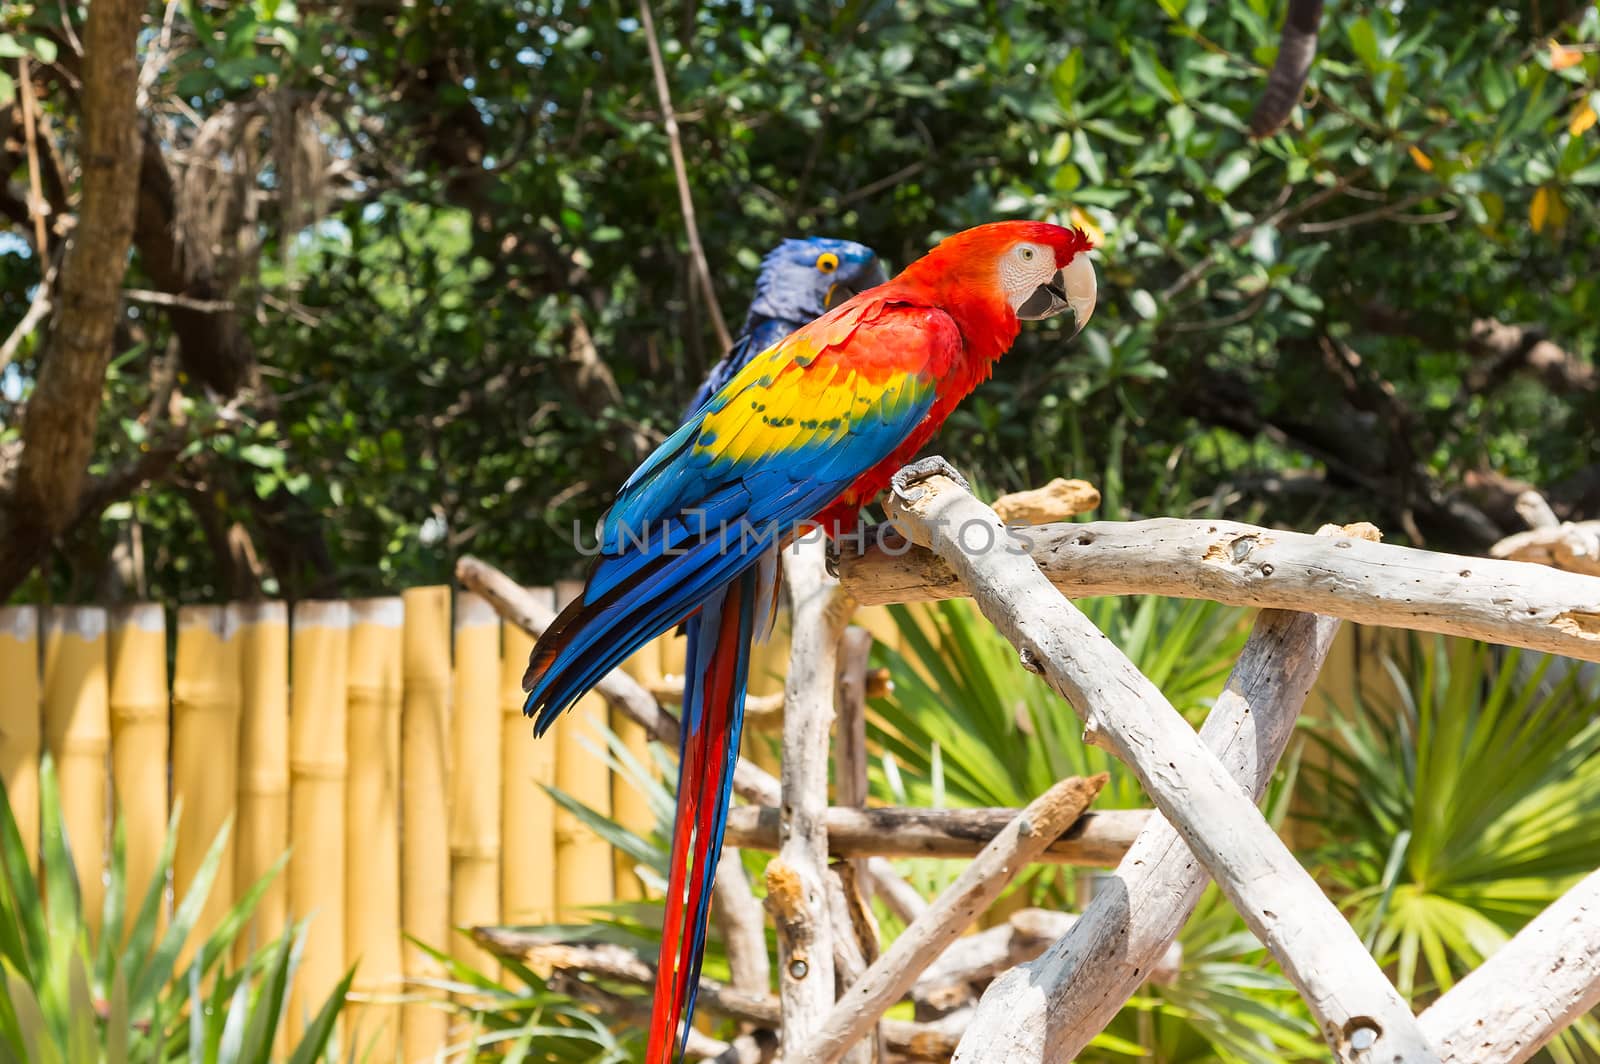 This bird is a Scarlet Macaw. It is native to Mexico, Central and South America. In the background is a Hyacinth Macaw.